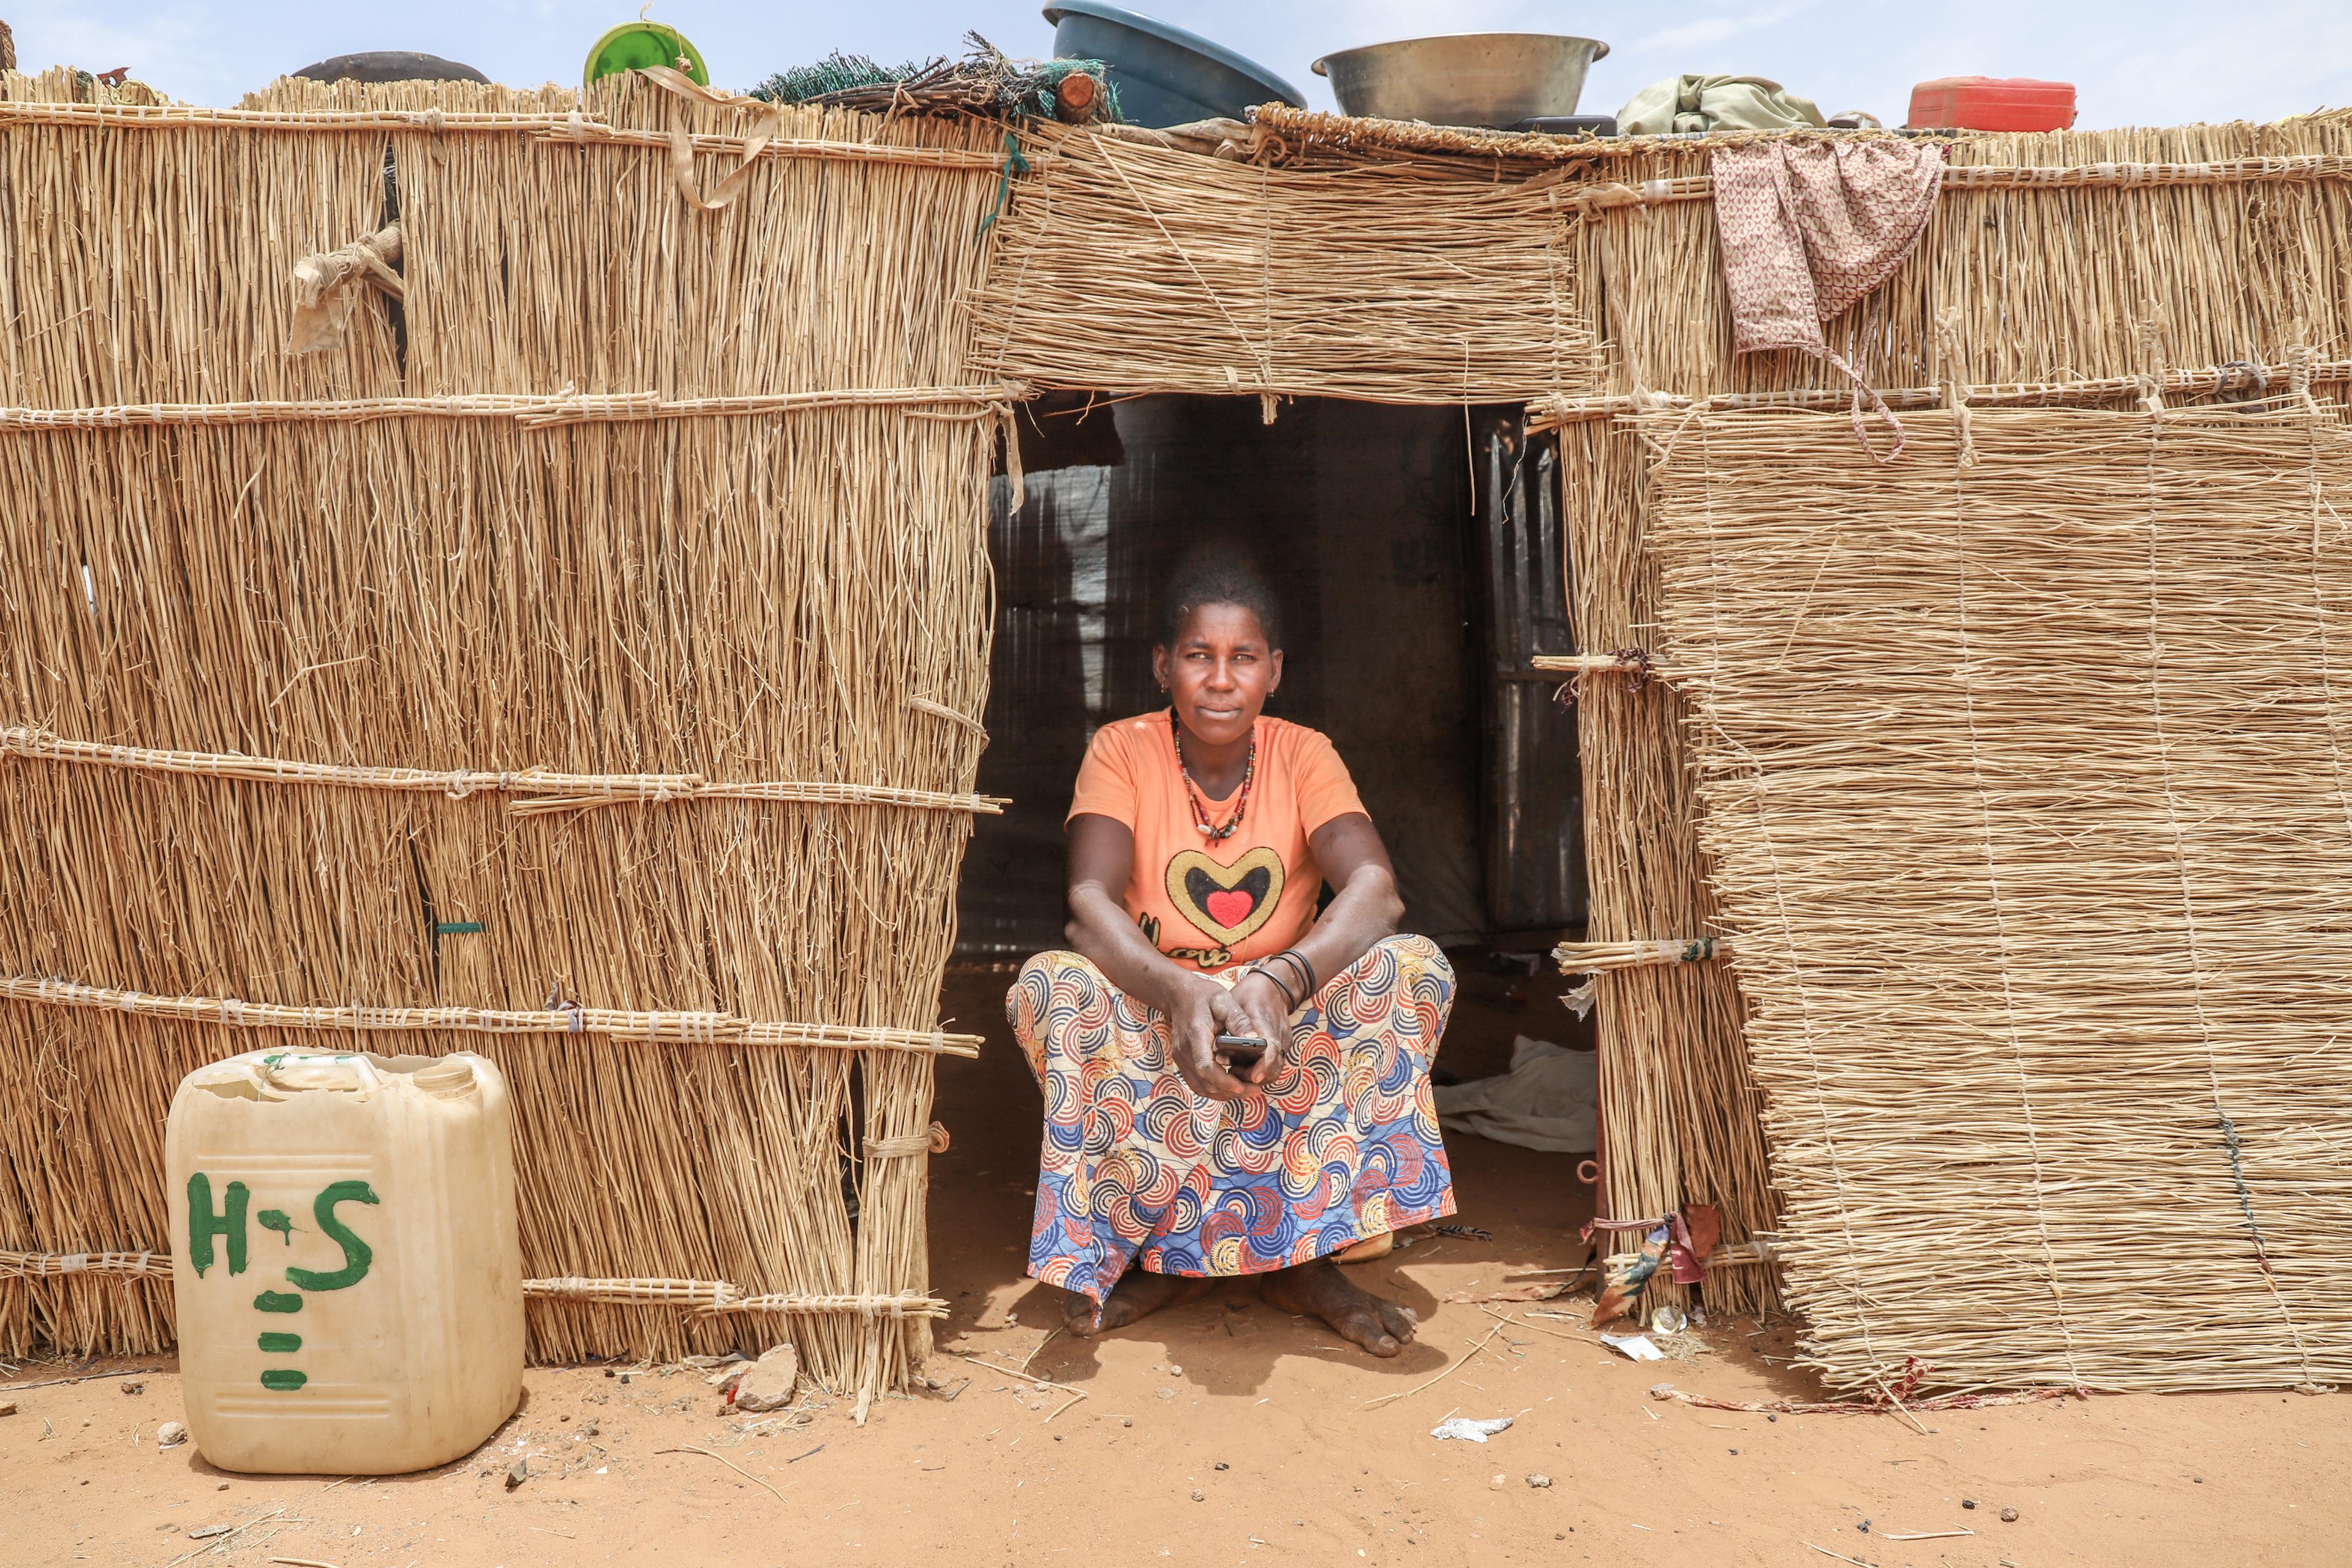 Safi 30 years old, mother of 5 children, refugee from the village of Yalanga in front of her hut in Djibo.